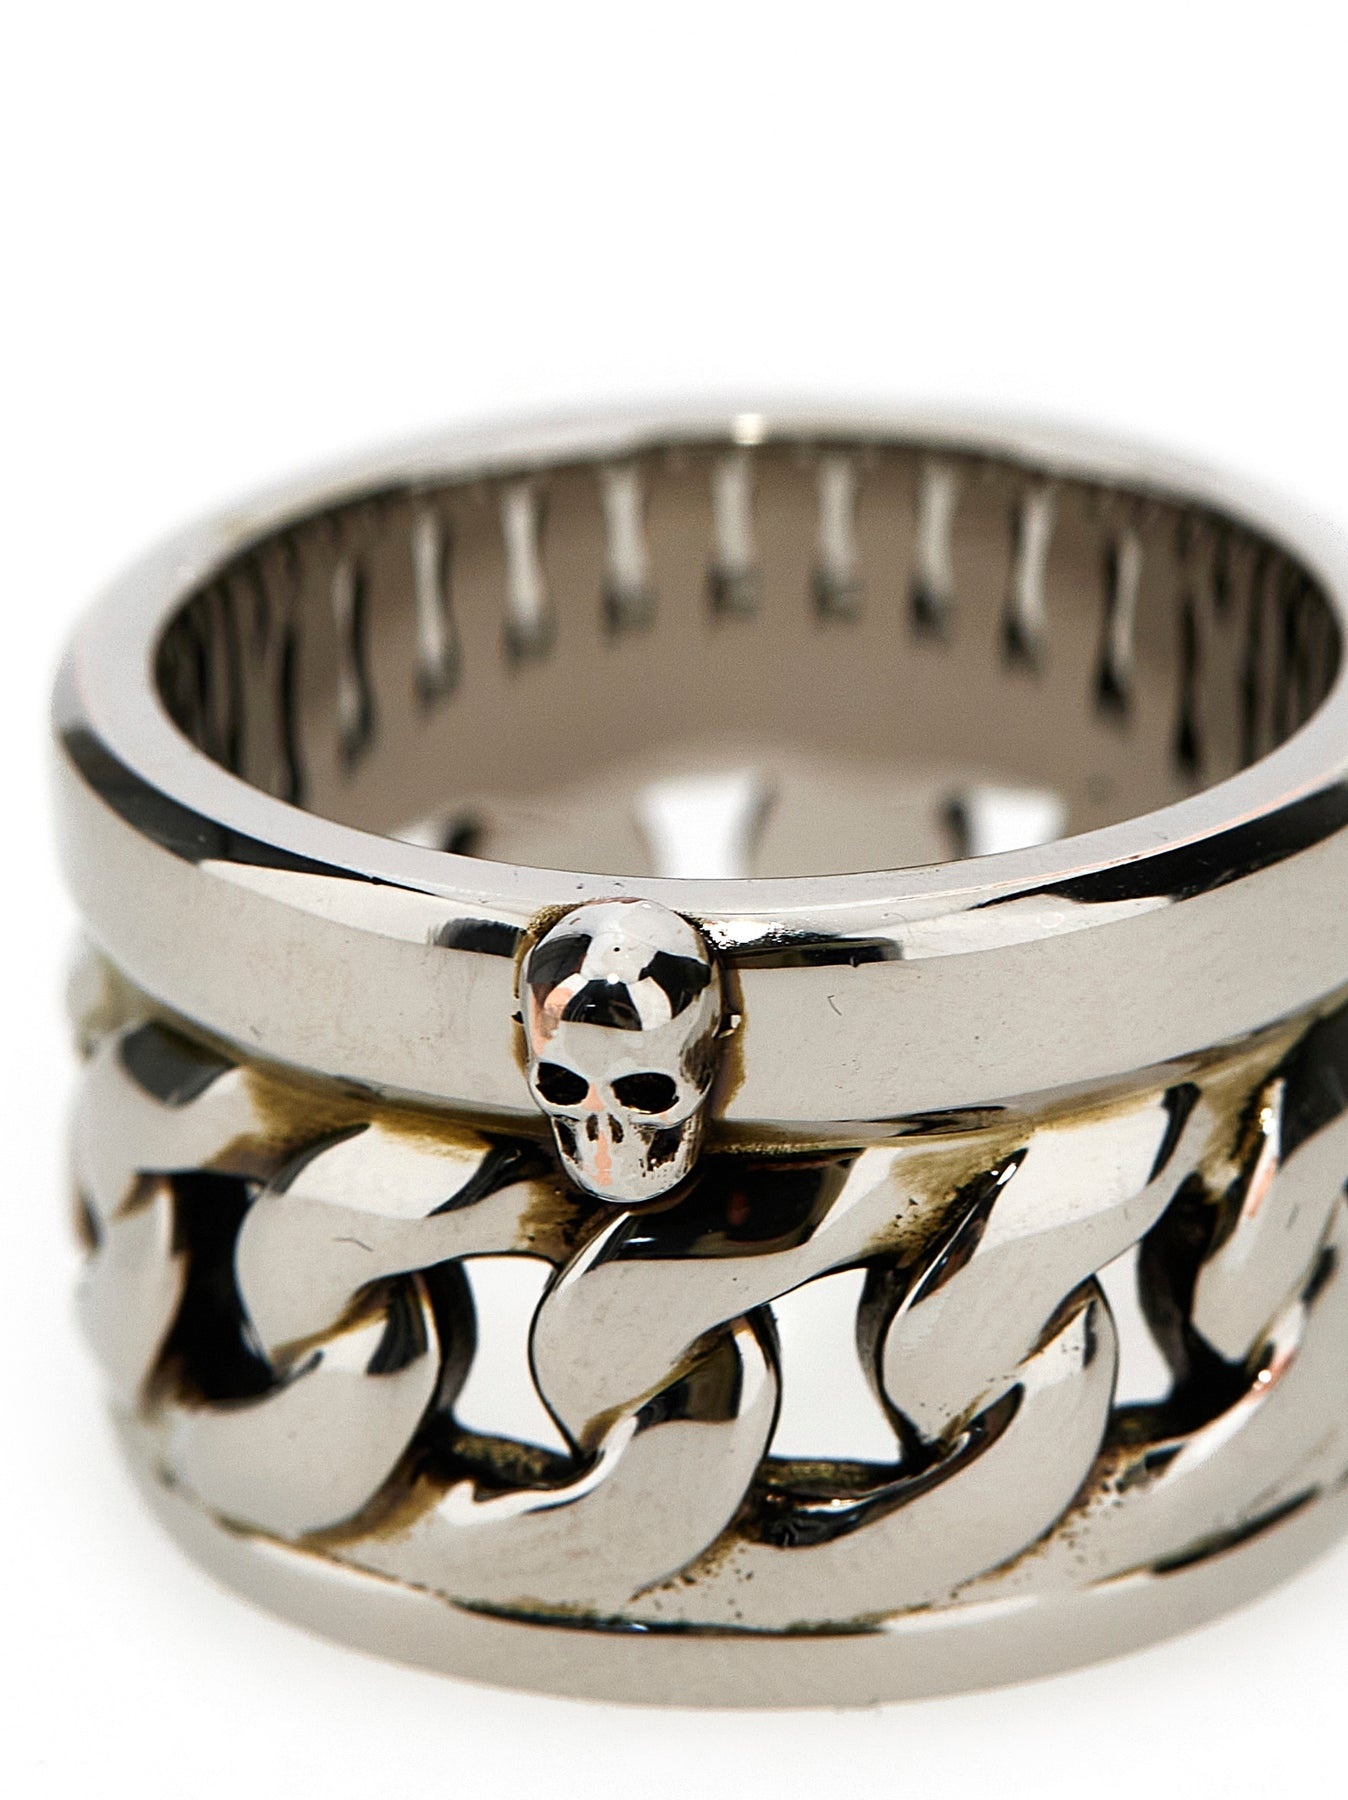 Dynamic Skull Ring Jewelry Silver - 3